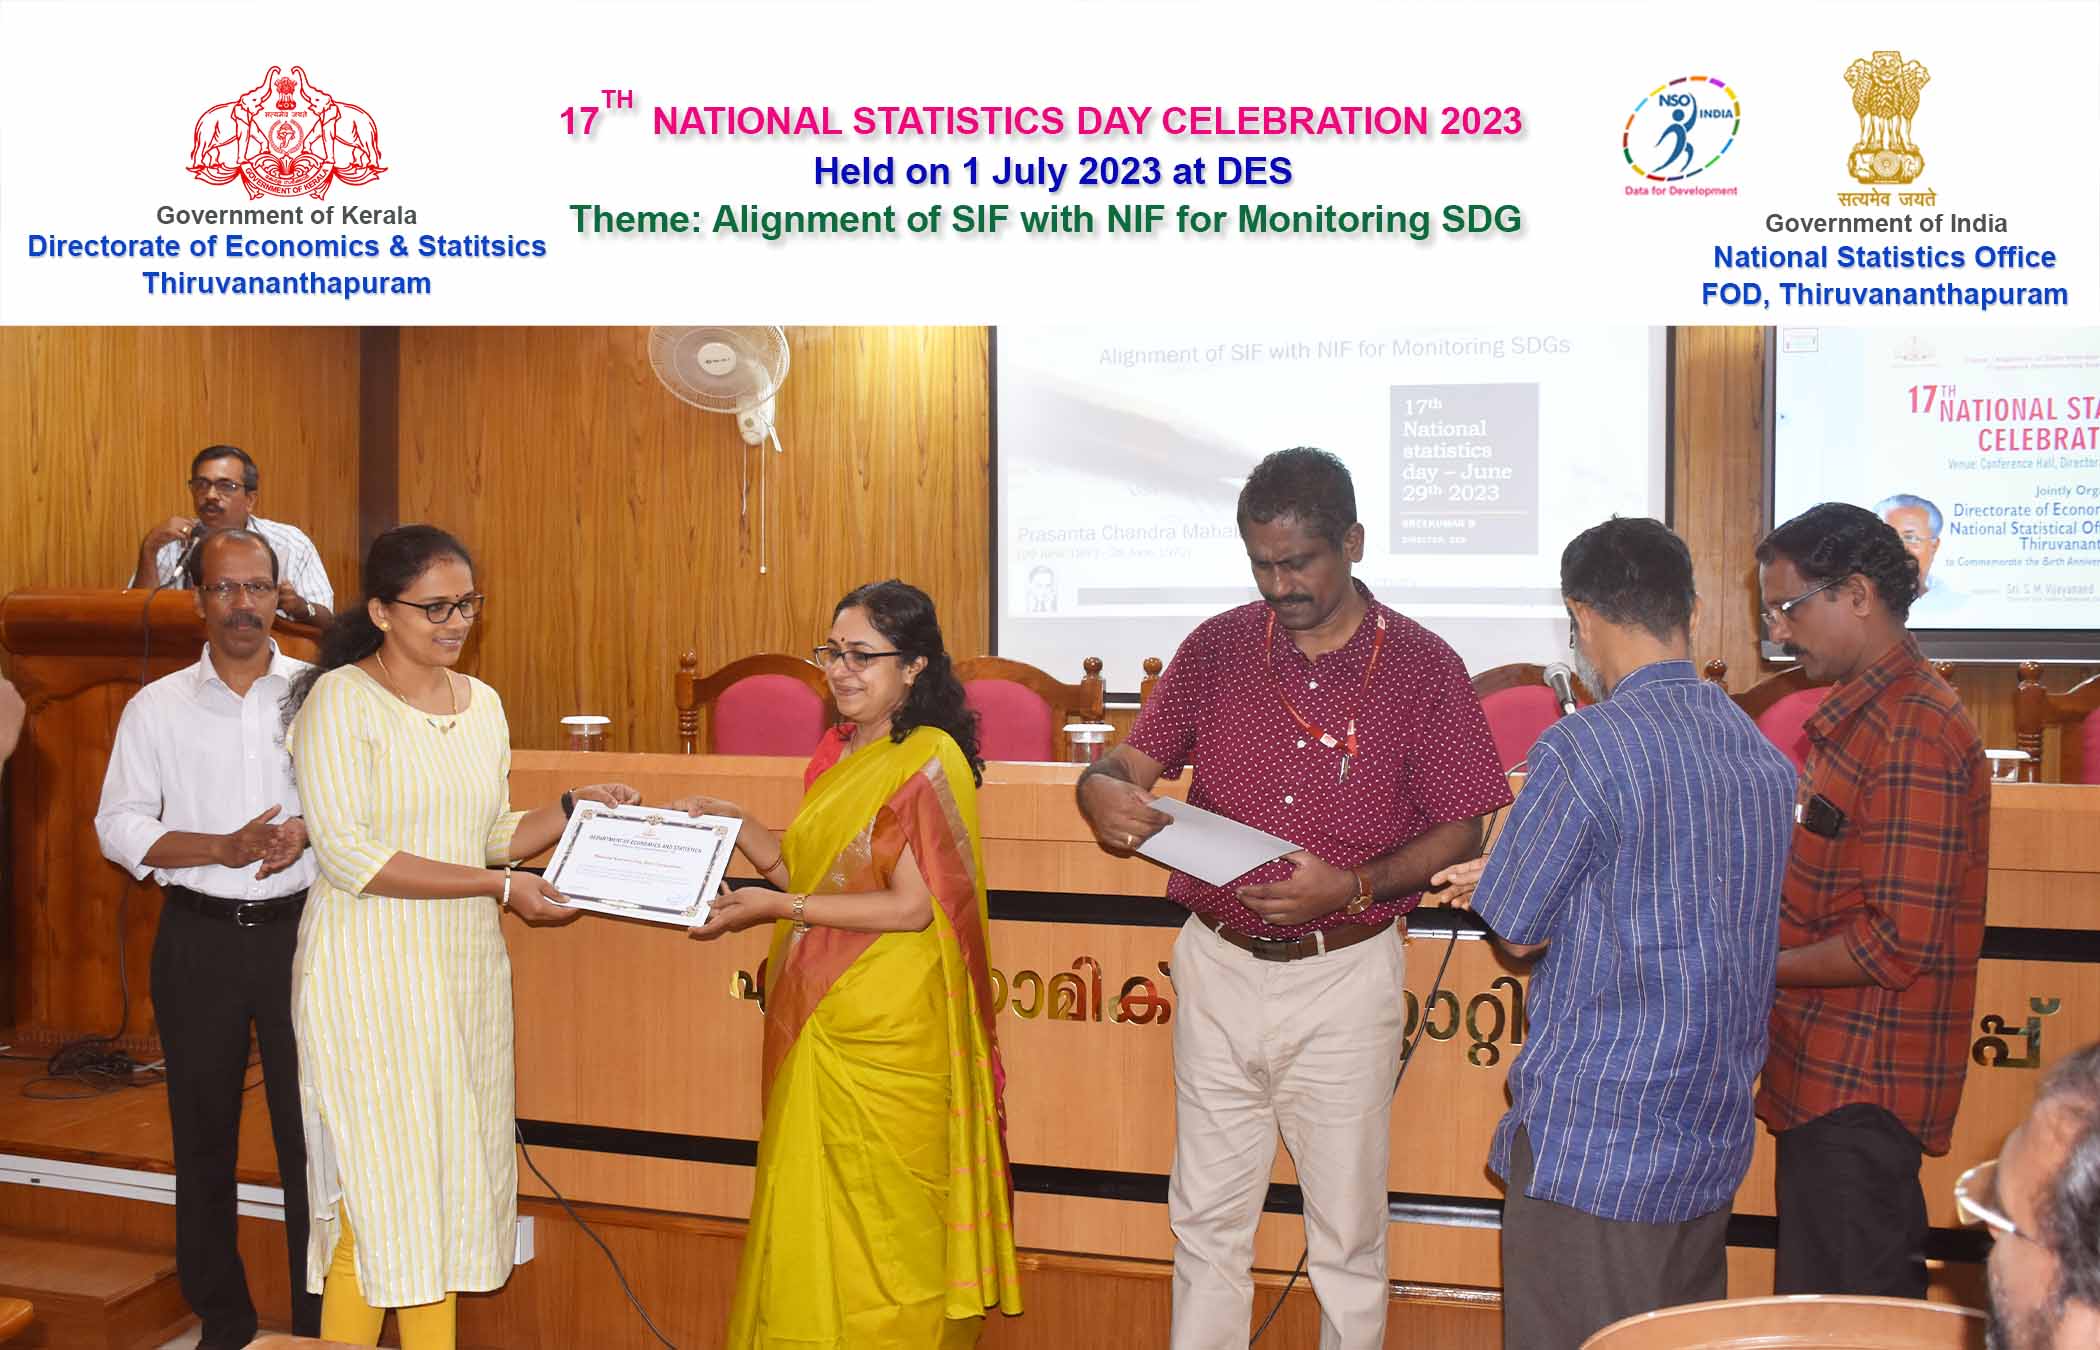 Distribution of certificate for participation in Quiz Competition held in connection with Statistics Day 2023